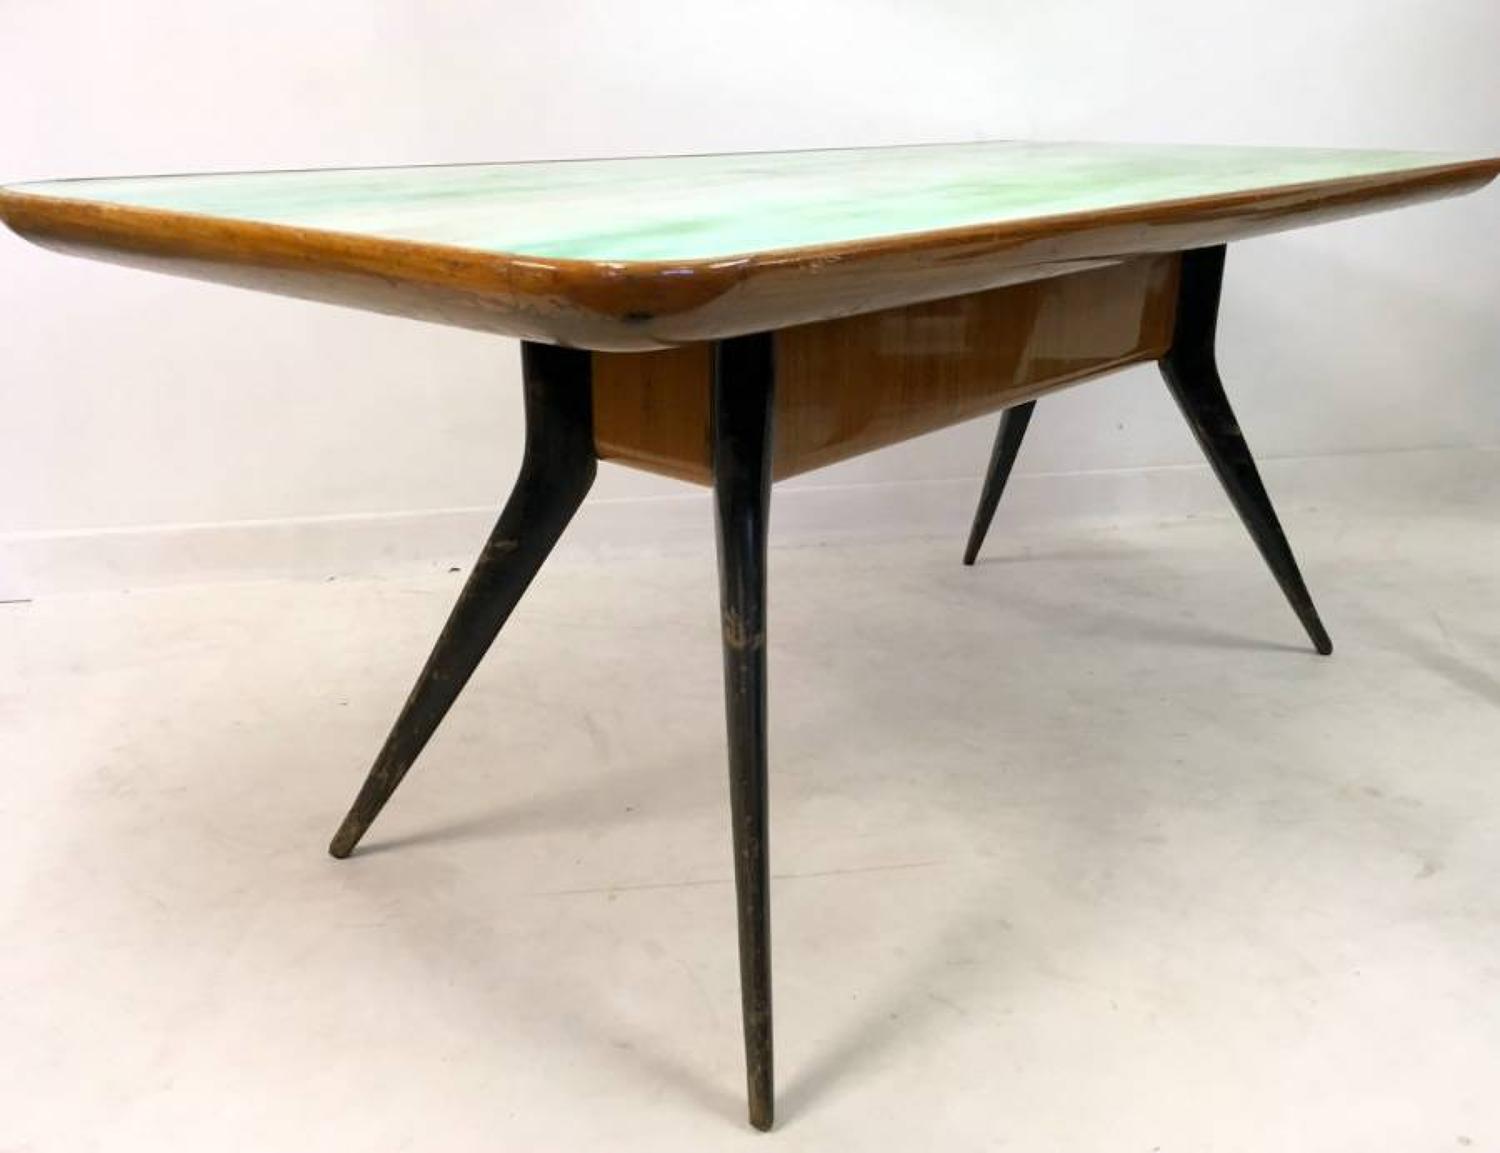 1950s Italian dining table with glass top